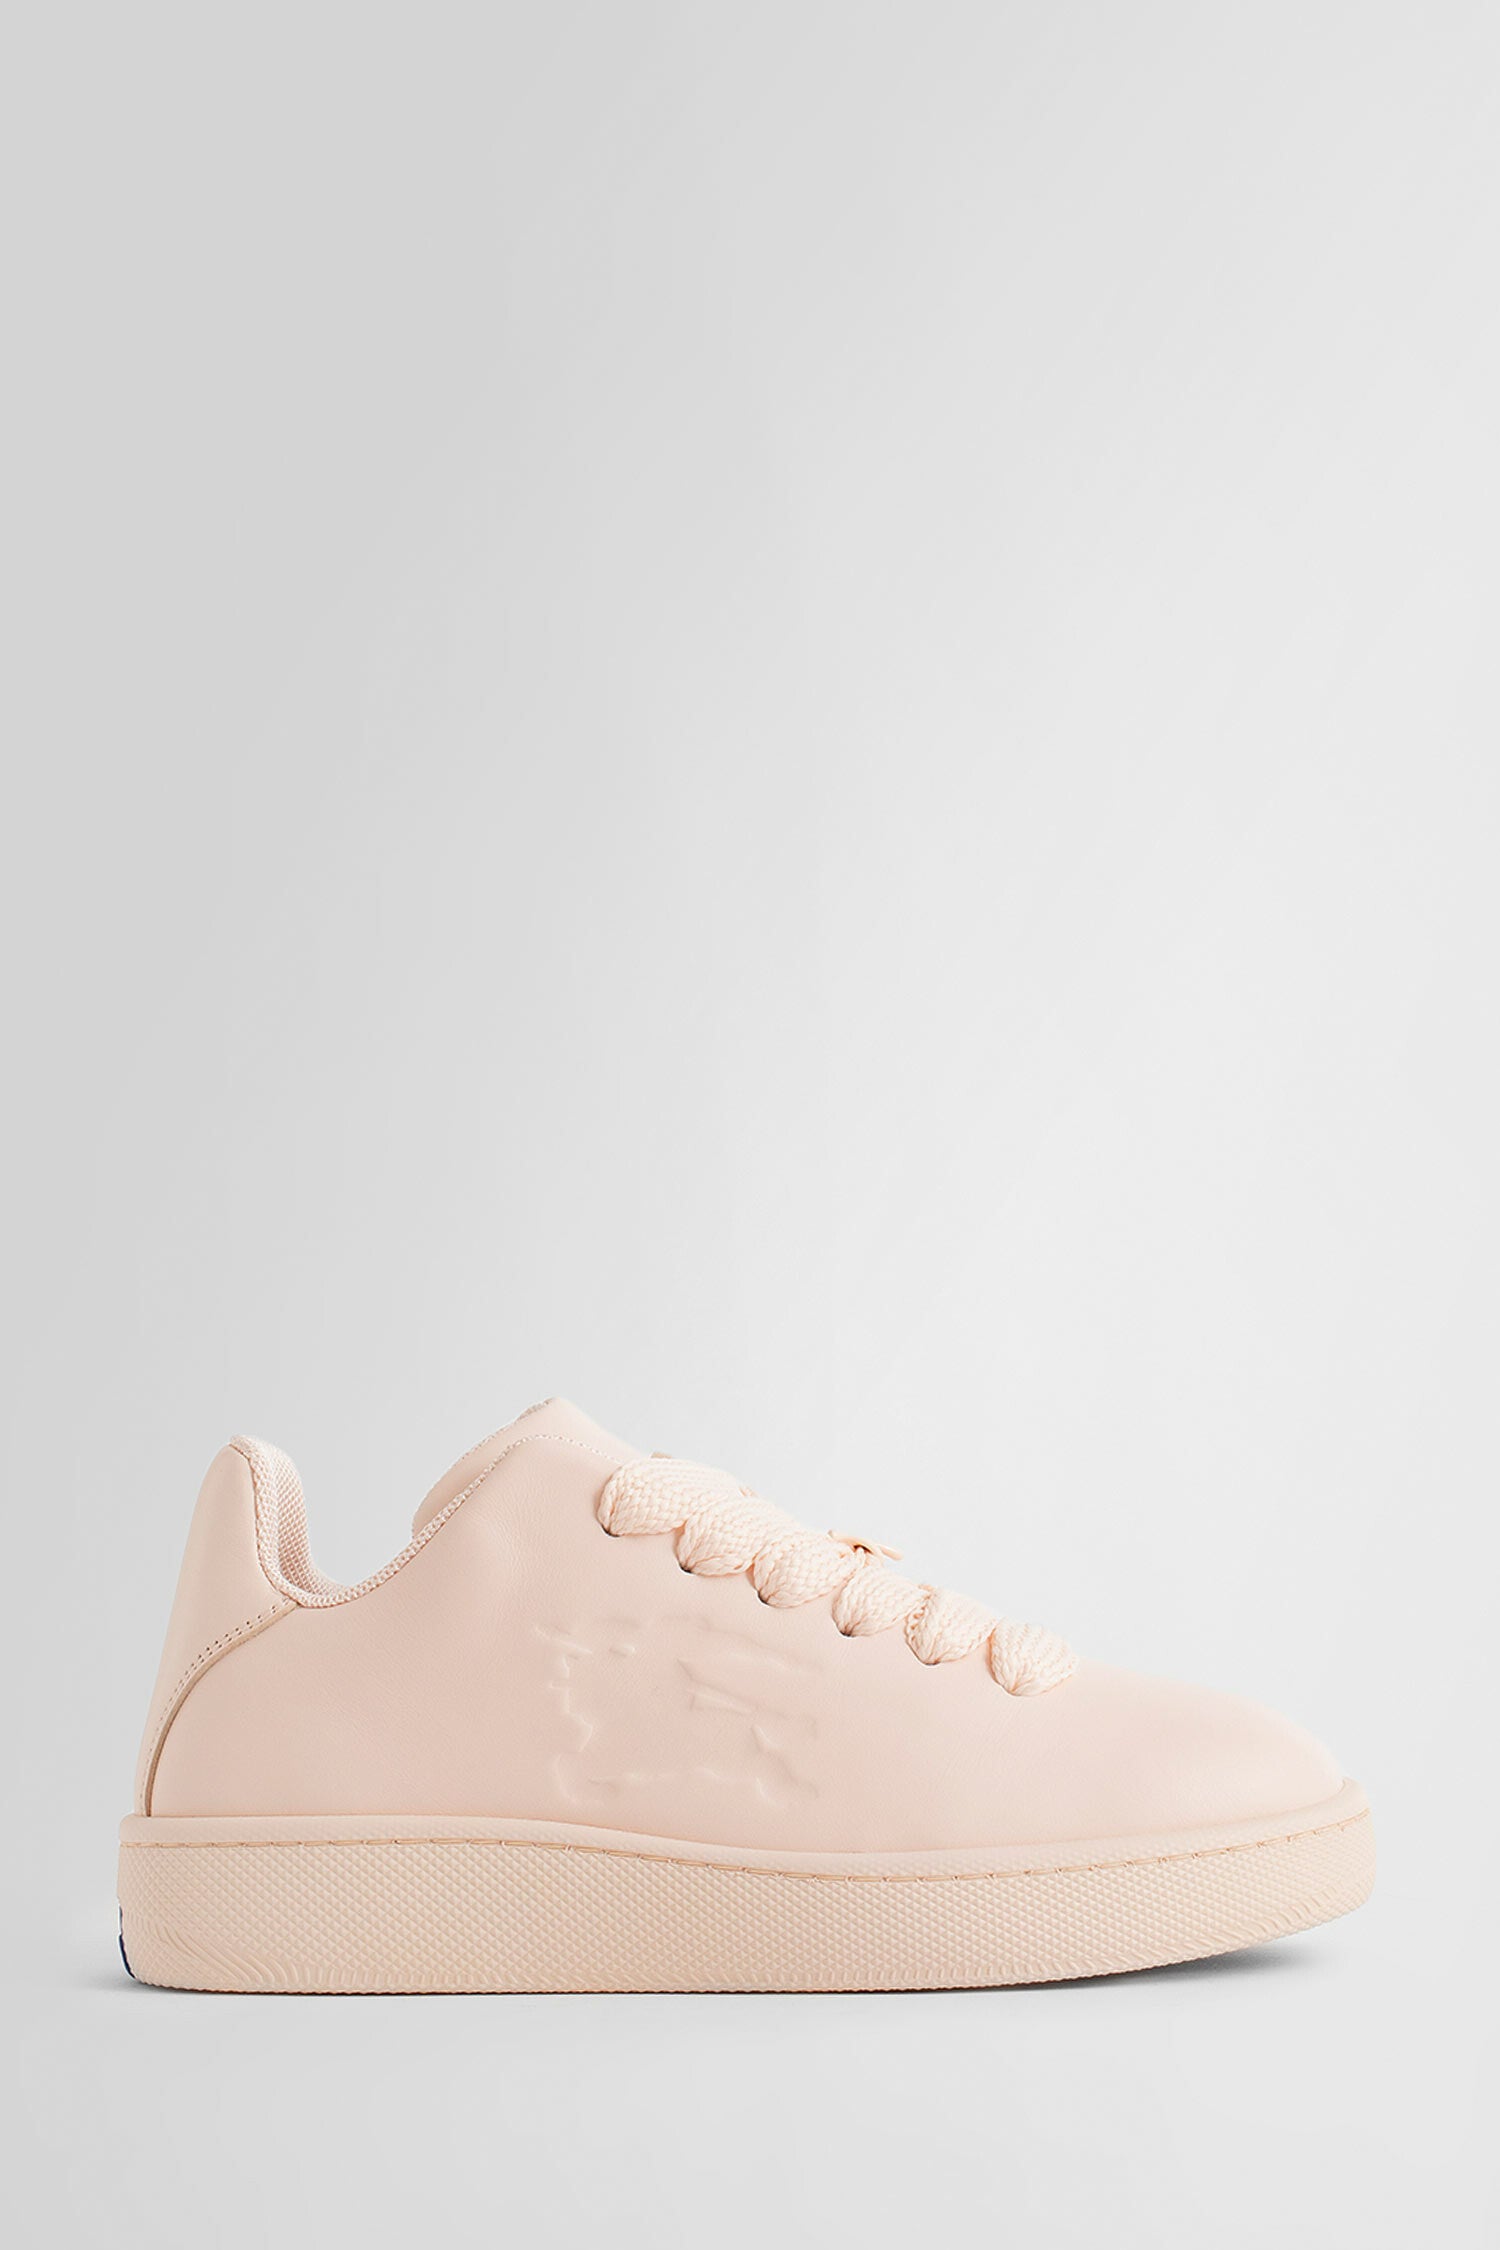 BURBERRY WOMAN PINK SNEAKERS